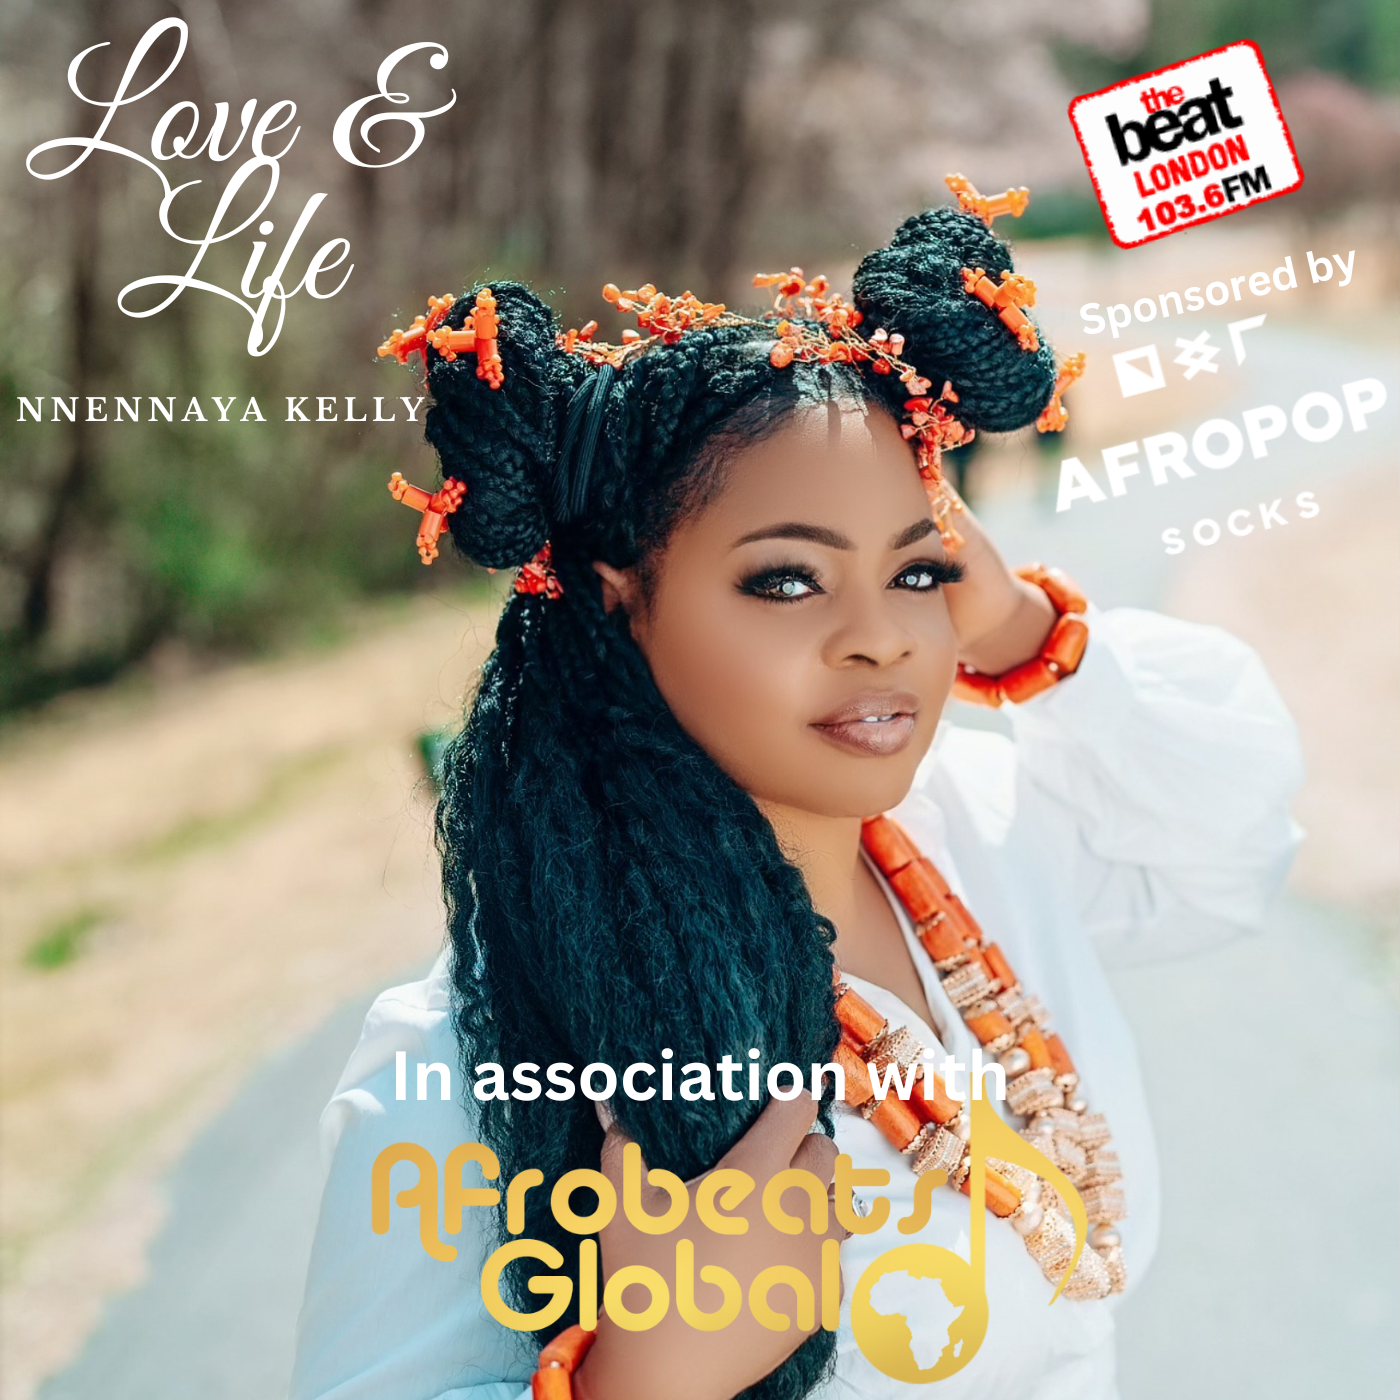 Afrofusion Soul: Love & Life - A Pre-Release Concert by Nnennaya Kelly